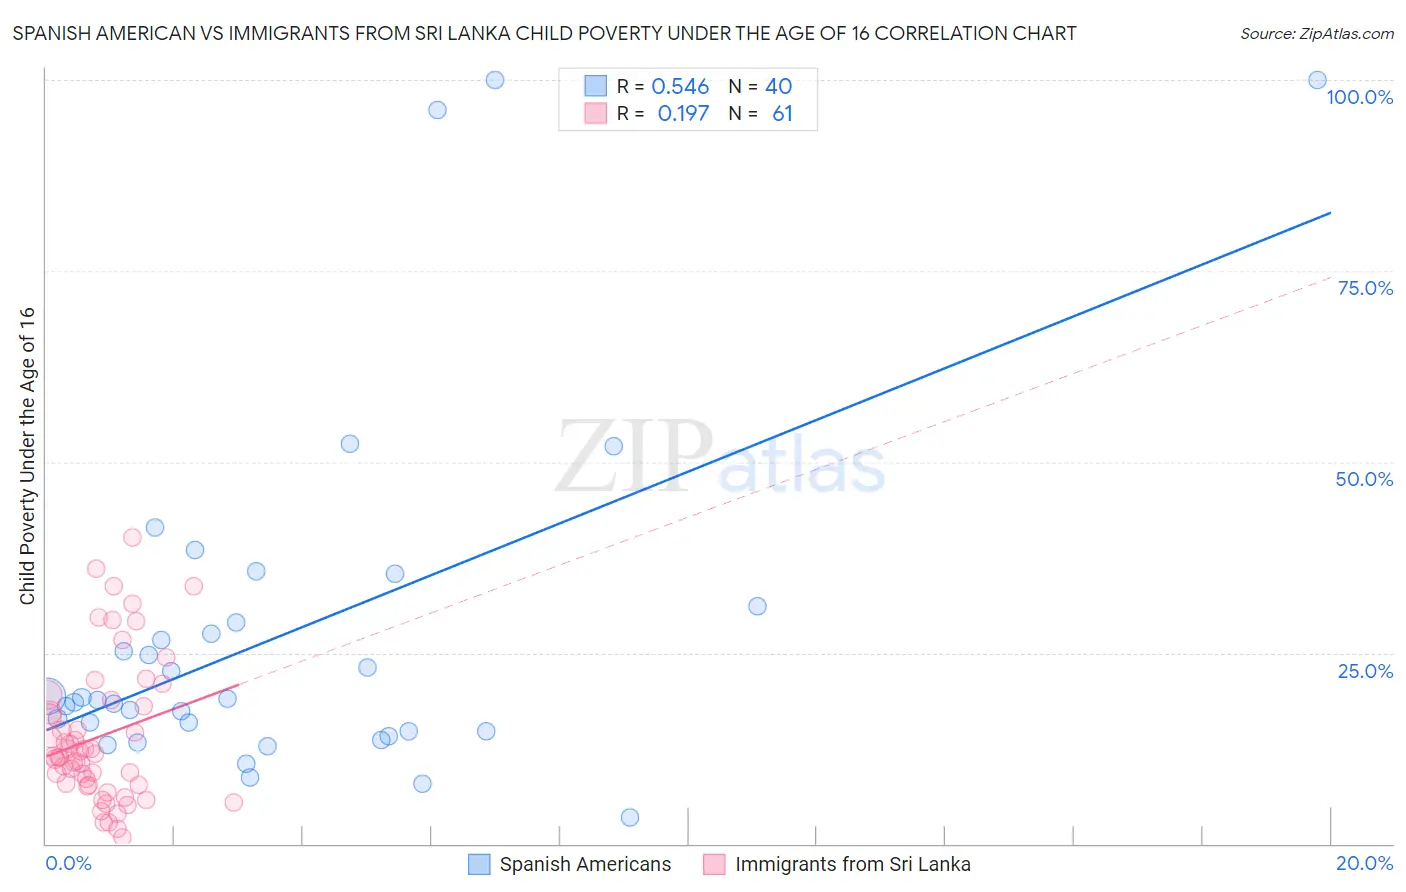 Spanish American vs Immigrants from Sri Lanka Child Poverty Under the Age of 16